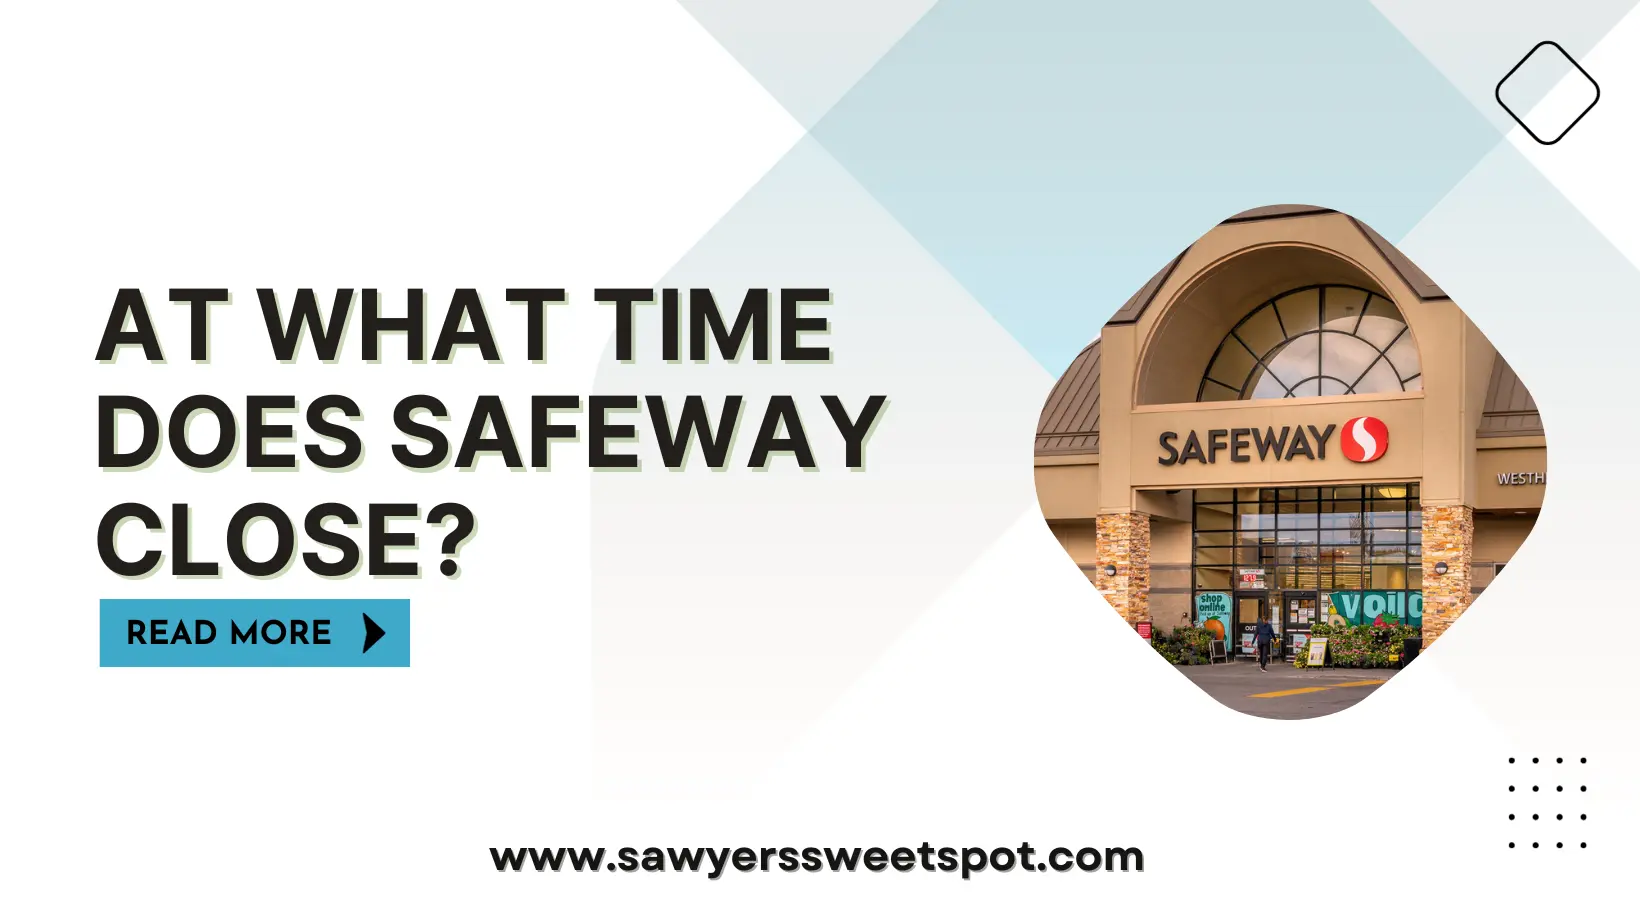 At What Time Does Safeway Close?